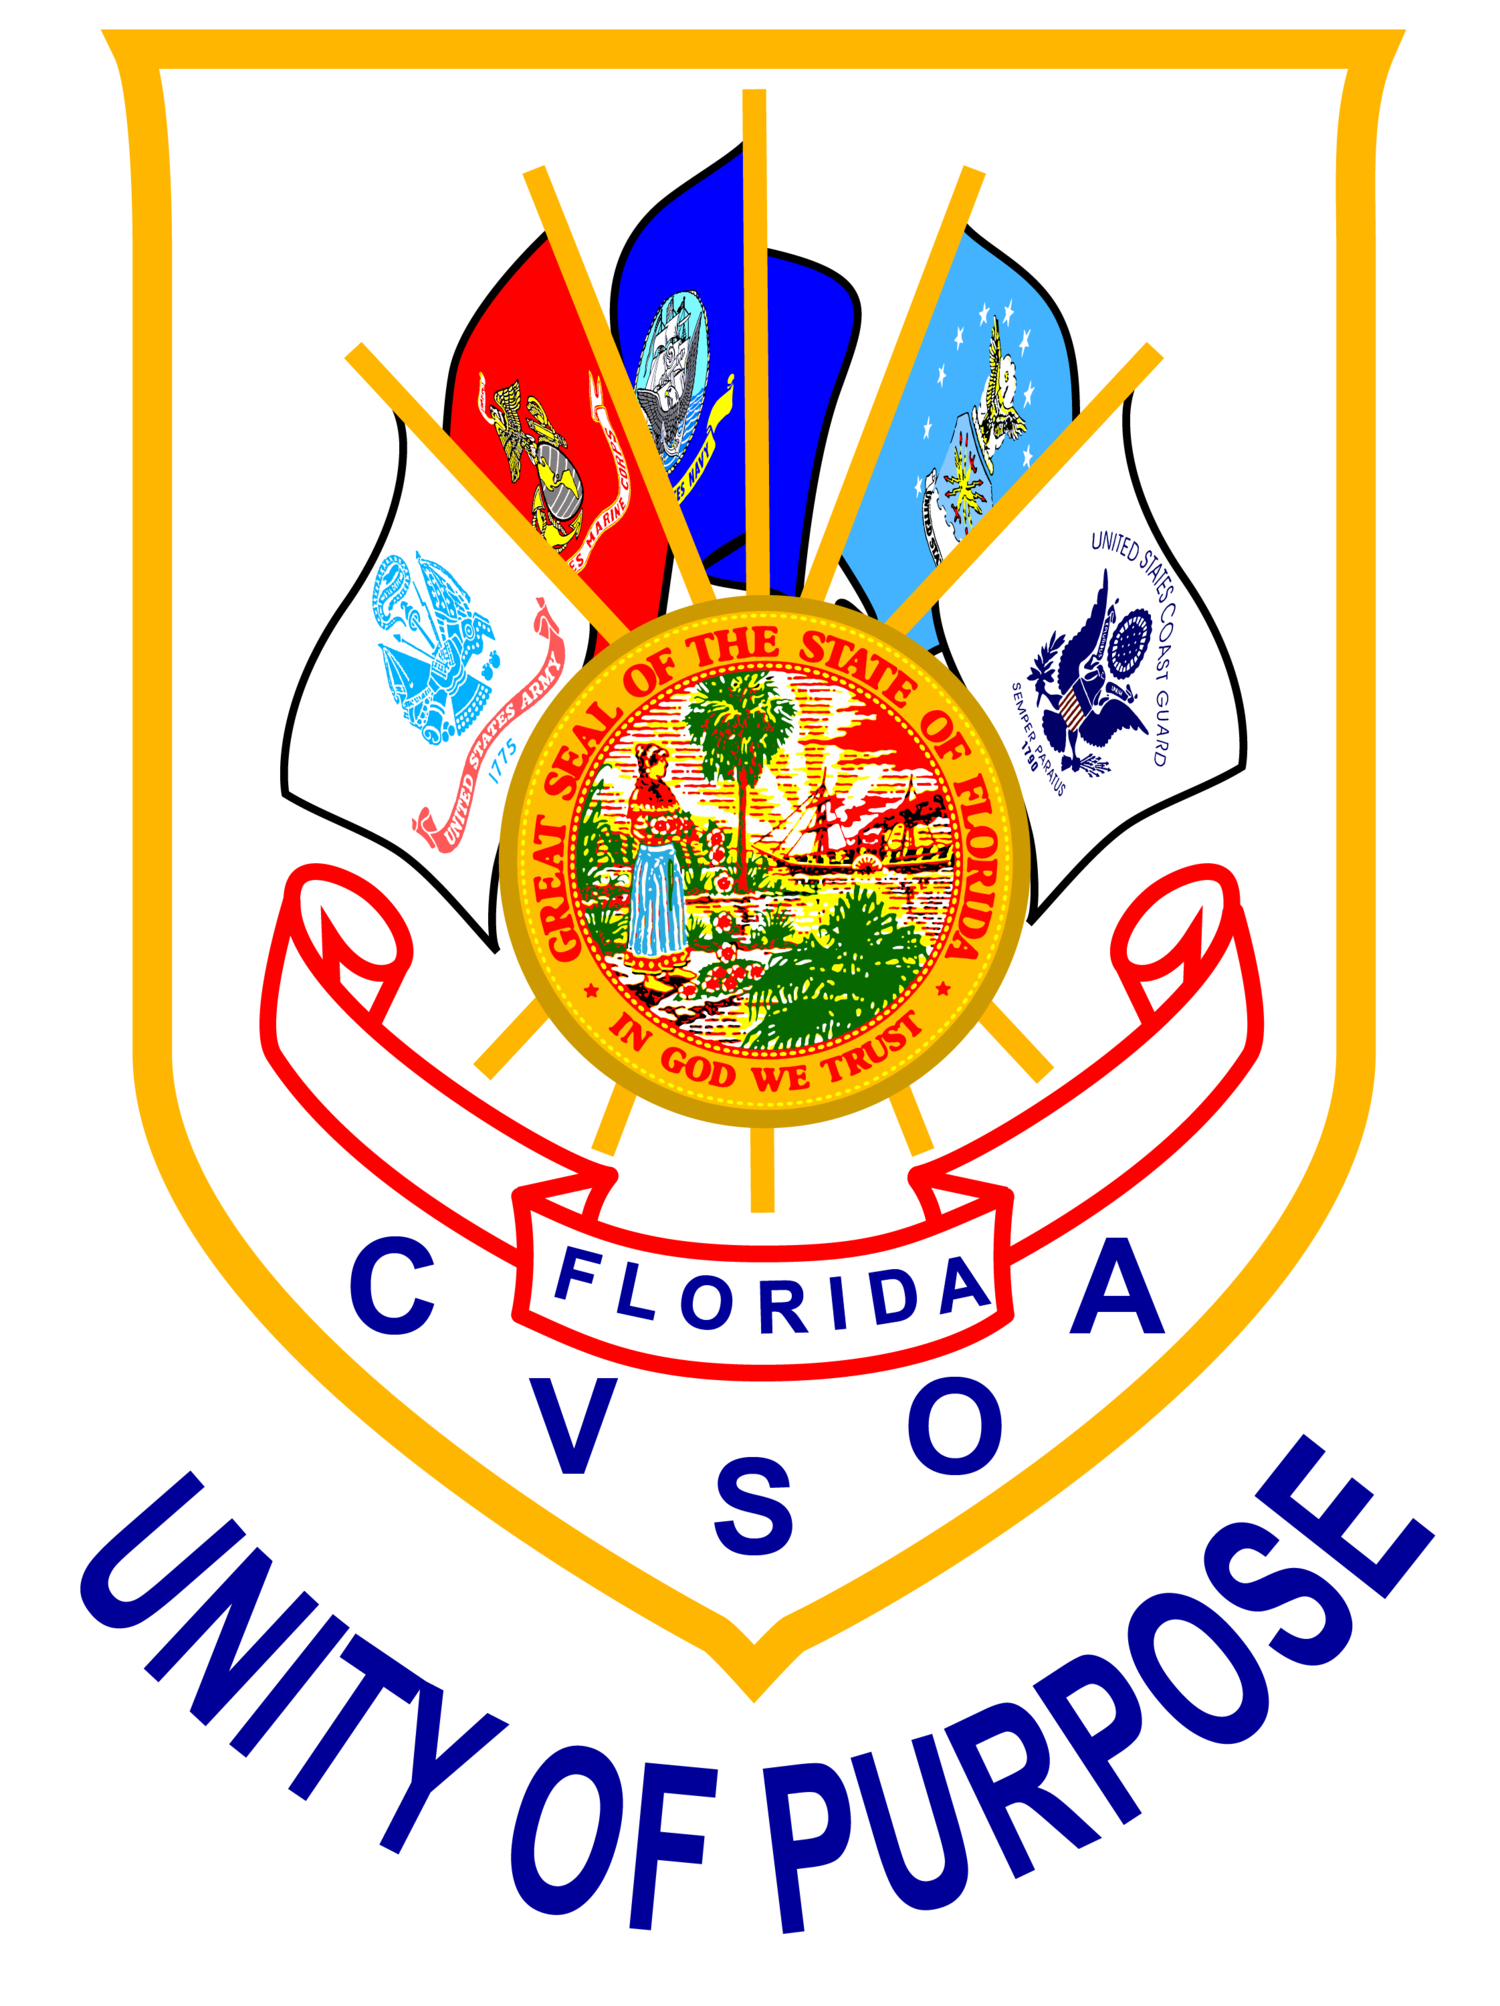 County Veterans Services Officer Association of Florida